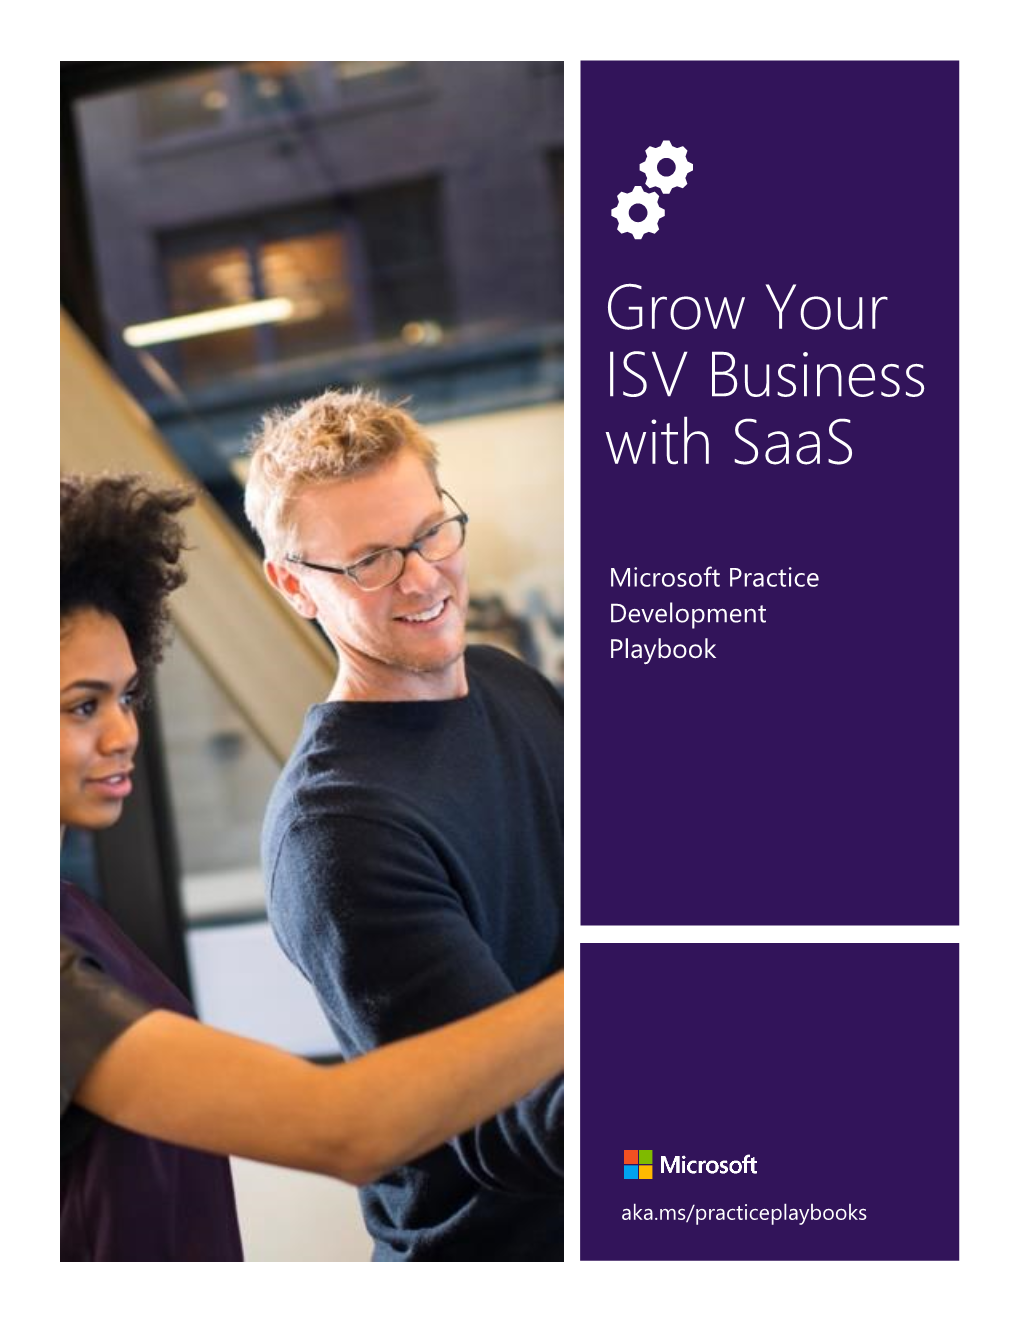 Grow Your ISV Business with Saas